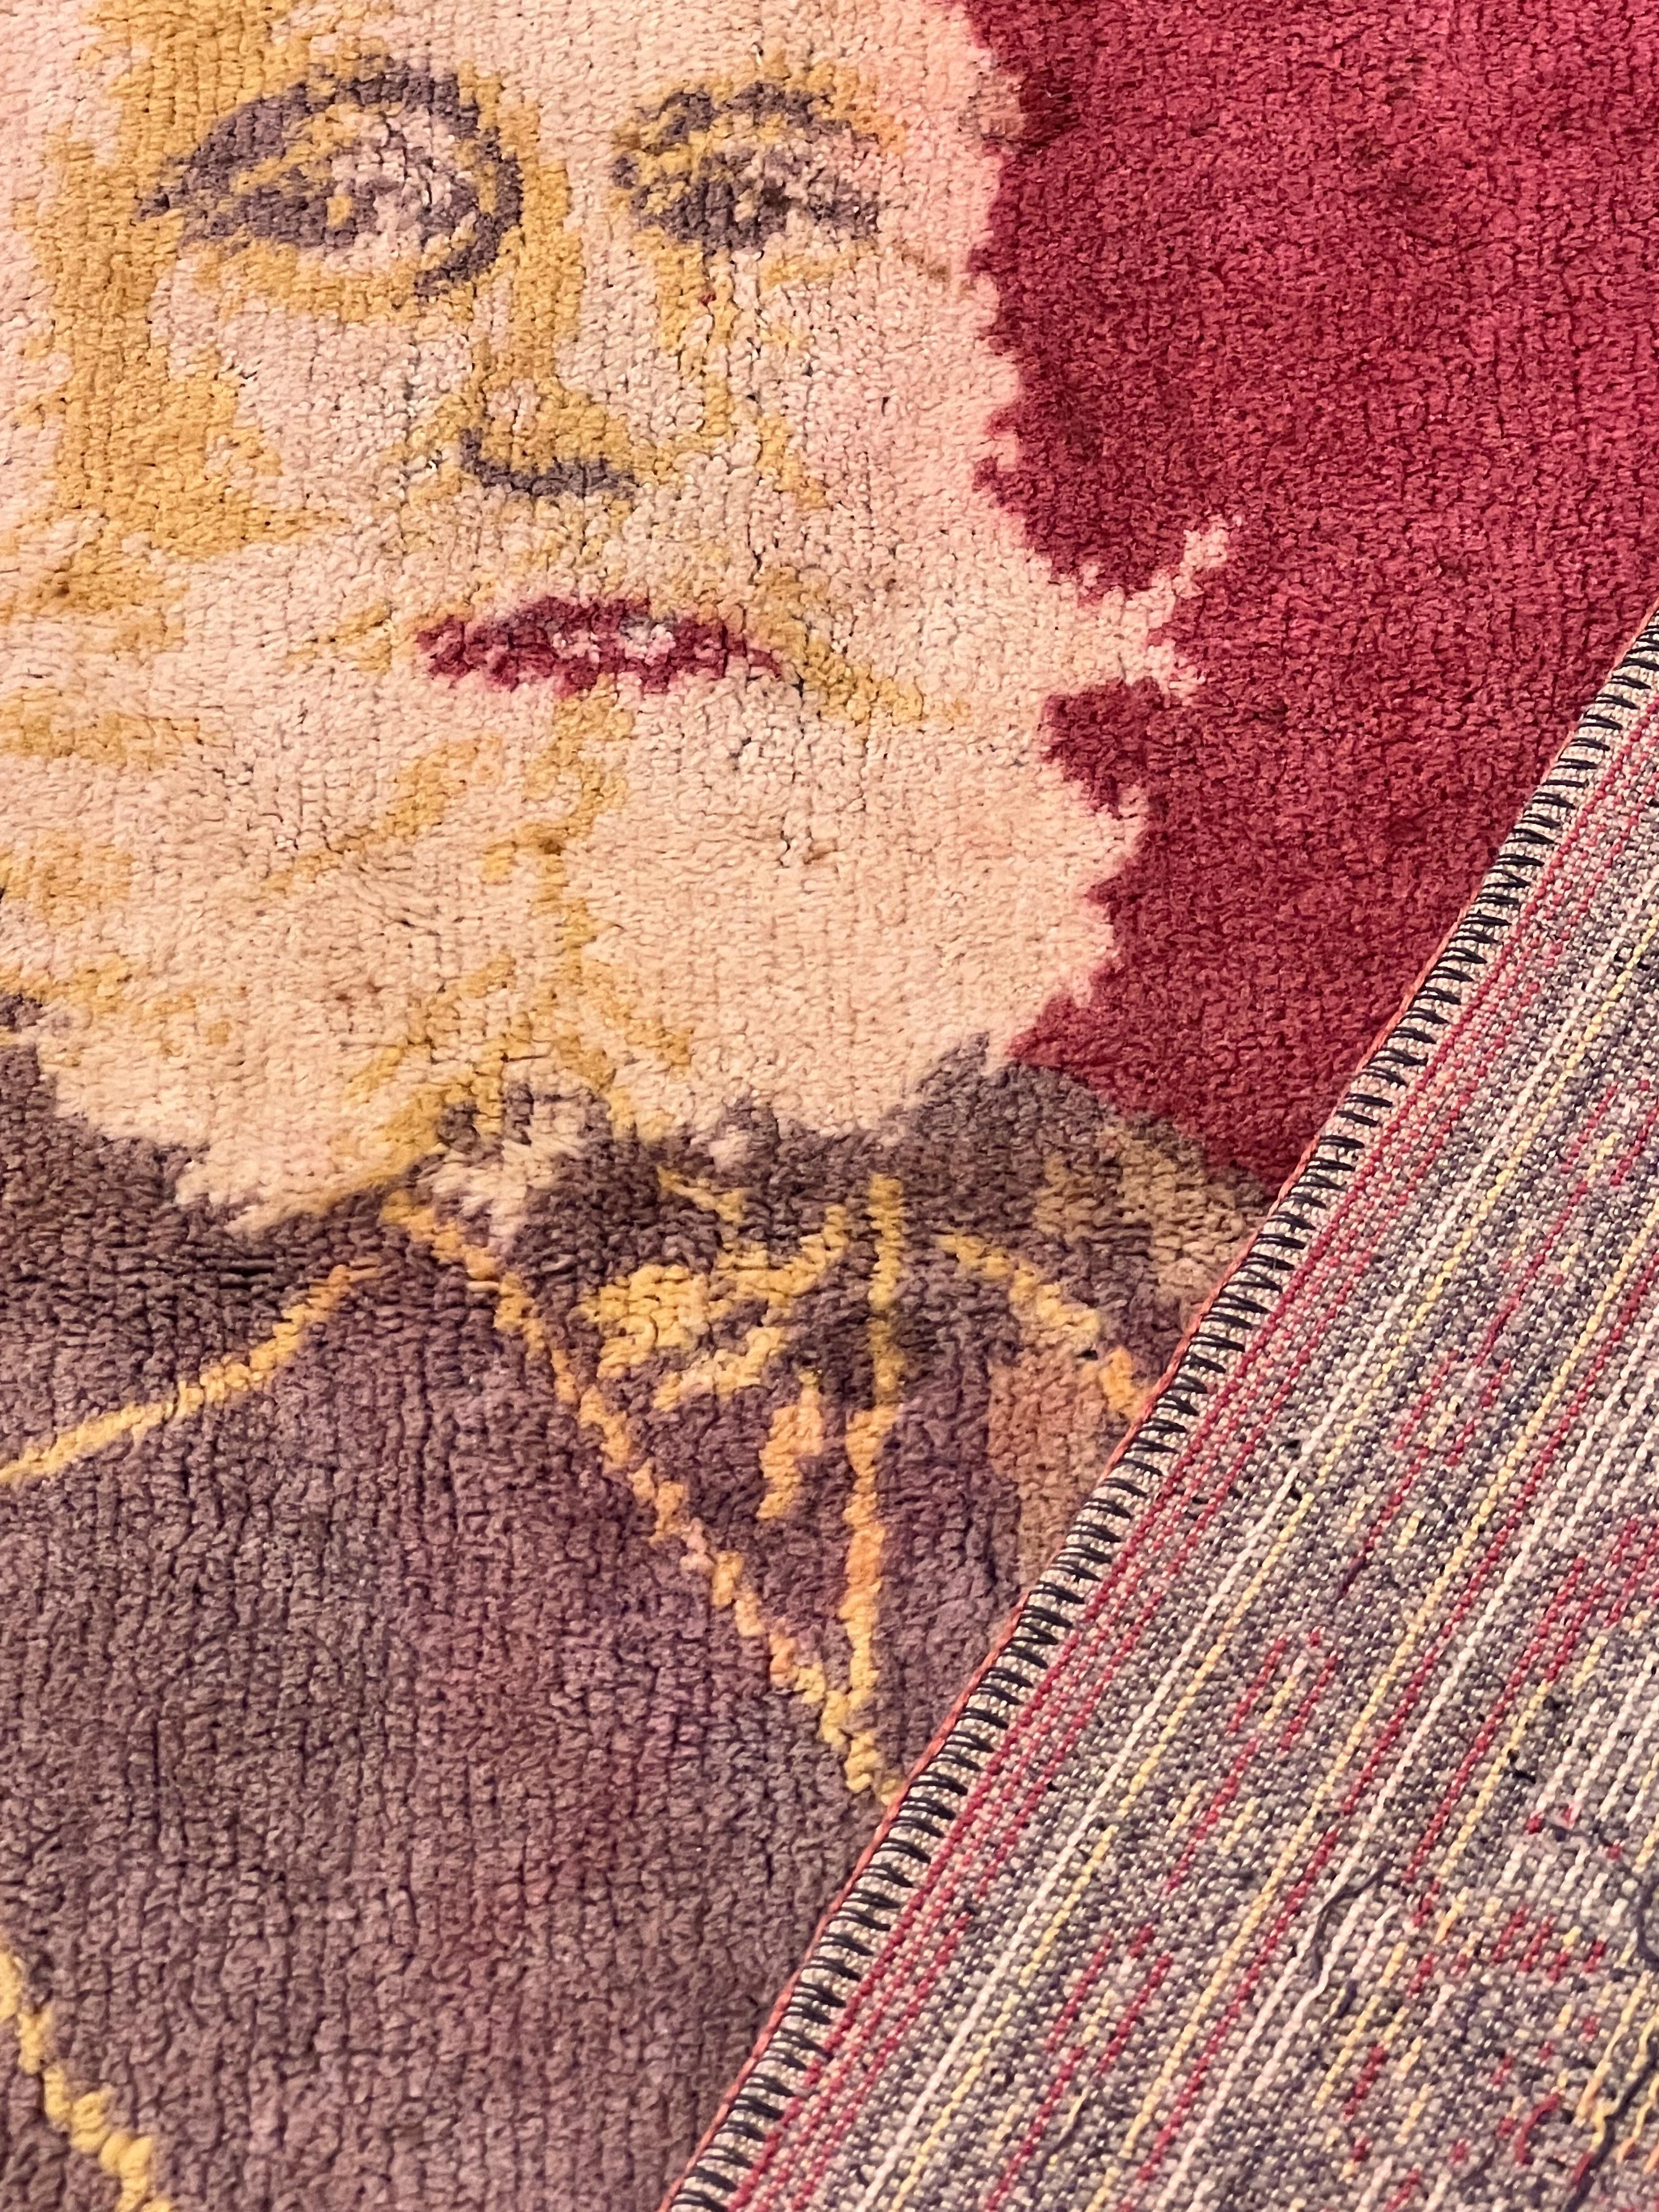 Early 20th Century Wall Carpet Produced by the Alliance School Crafts 